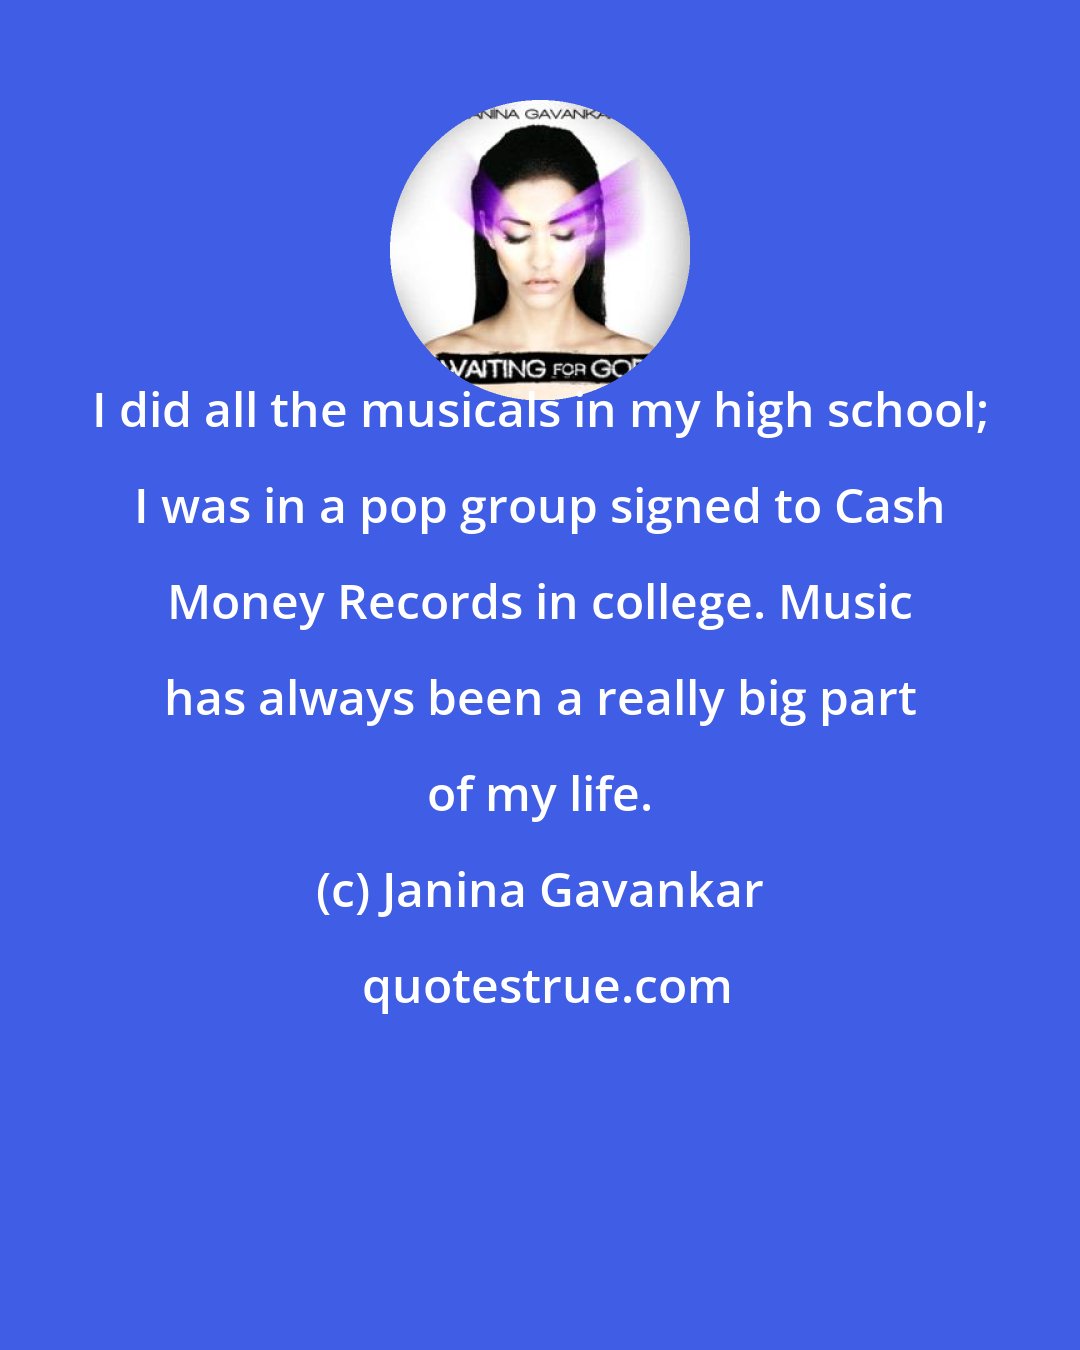 Janina Gavankar: I did all the musicals in my high school; I was in a pop group signed to Cash Money Records in college. Music has always been a really big part of my life.